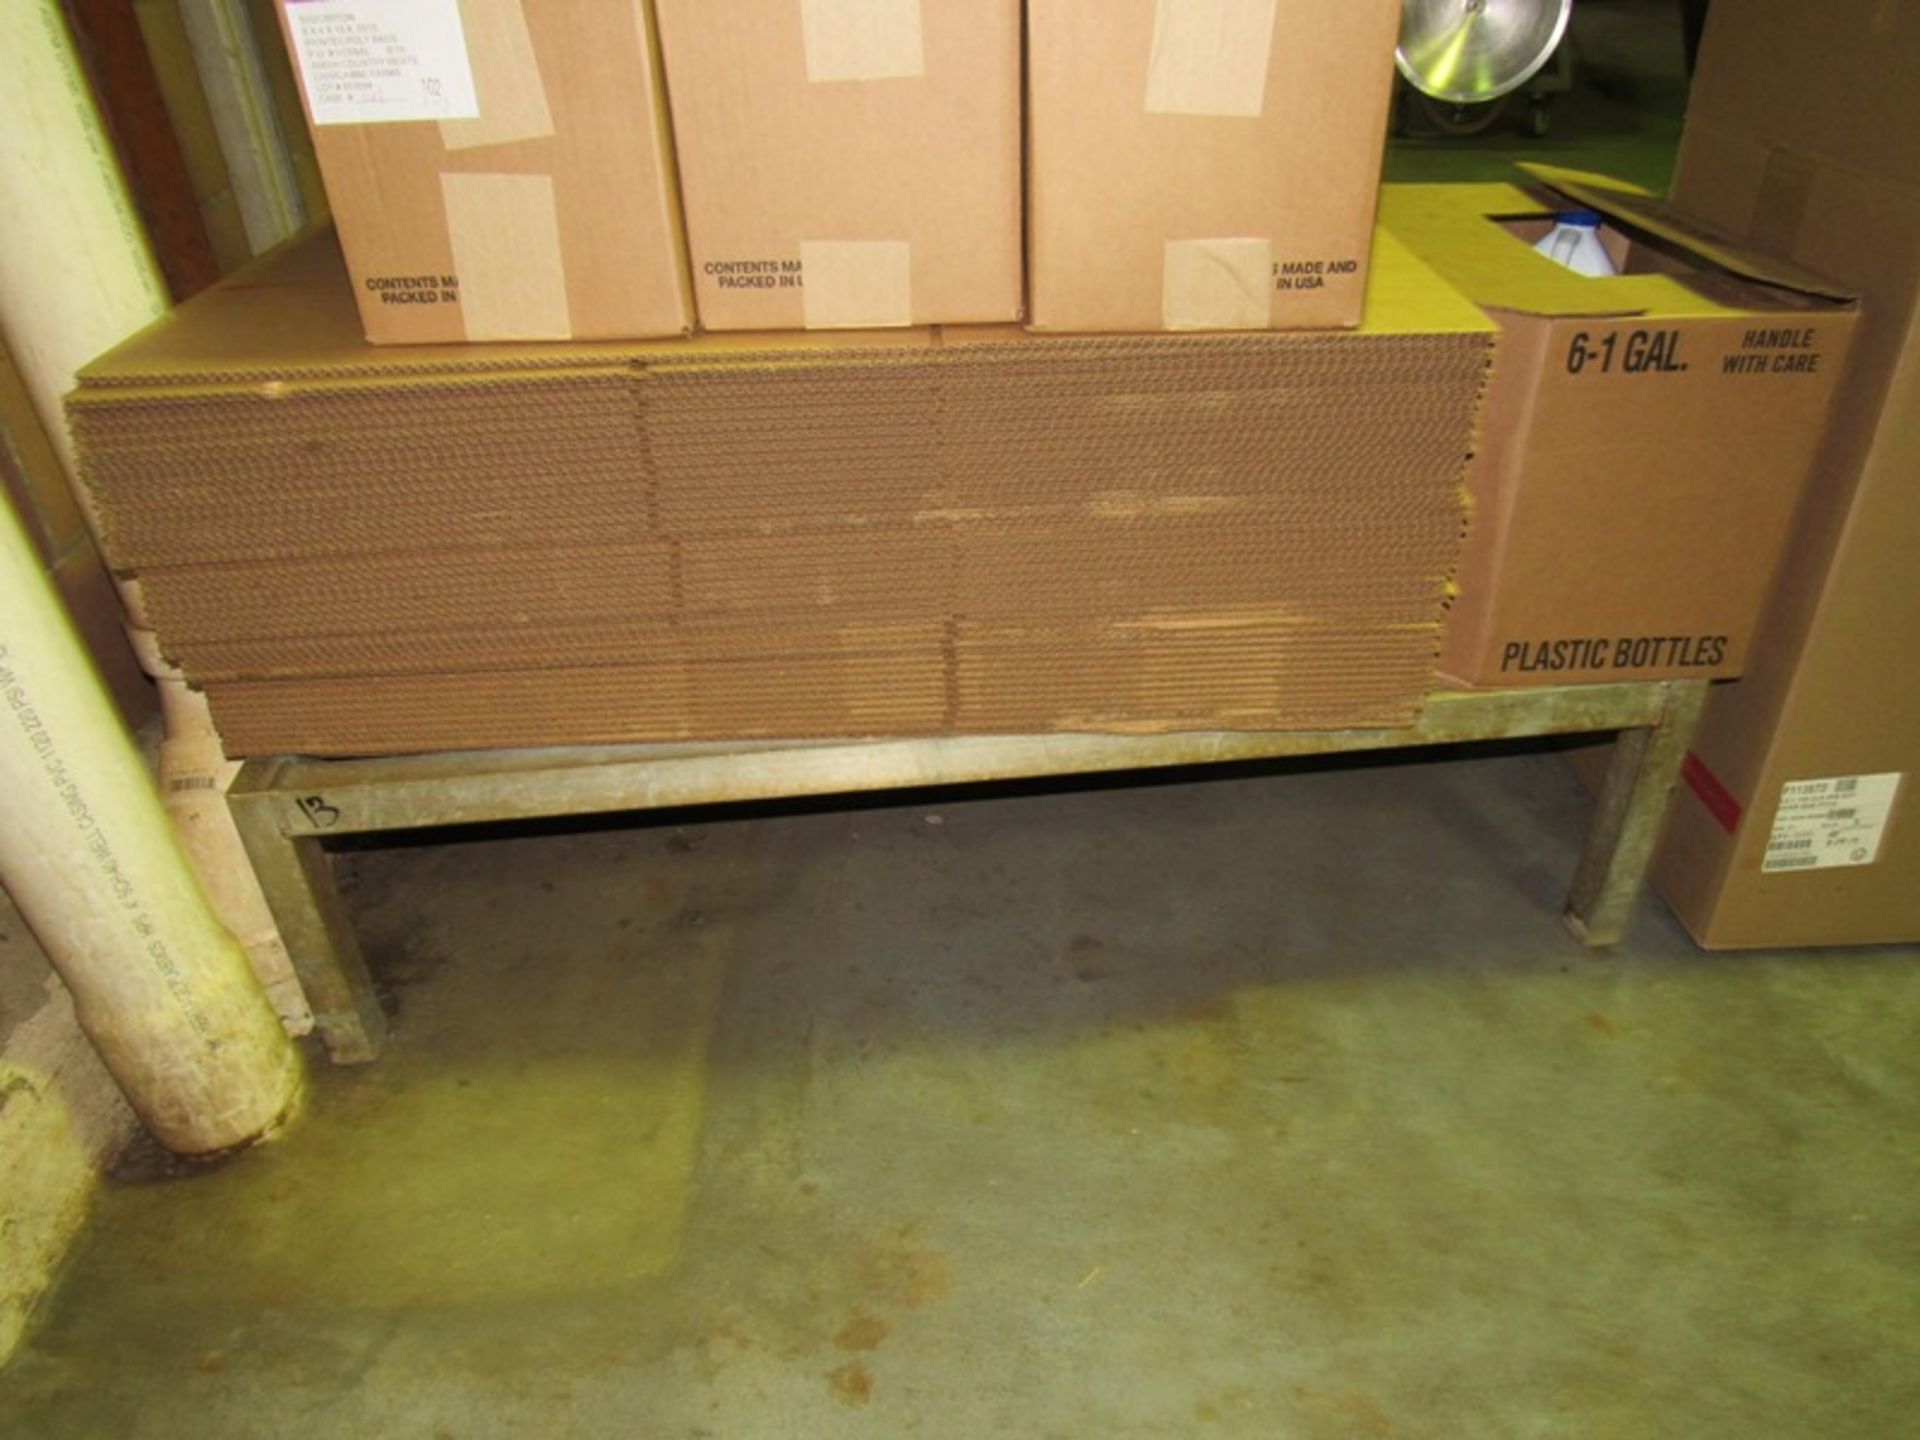 Lot of (4) Dunnage Racks, (3) 20" W X 4' L X 12" T, (1) 20" W X 37" X 7" T(No product or lotted - Image 4 of 4